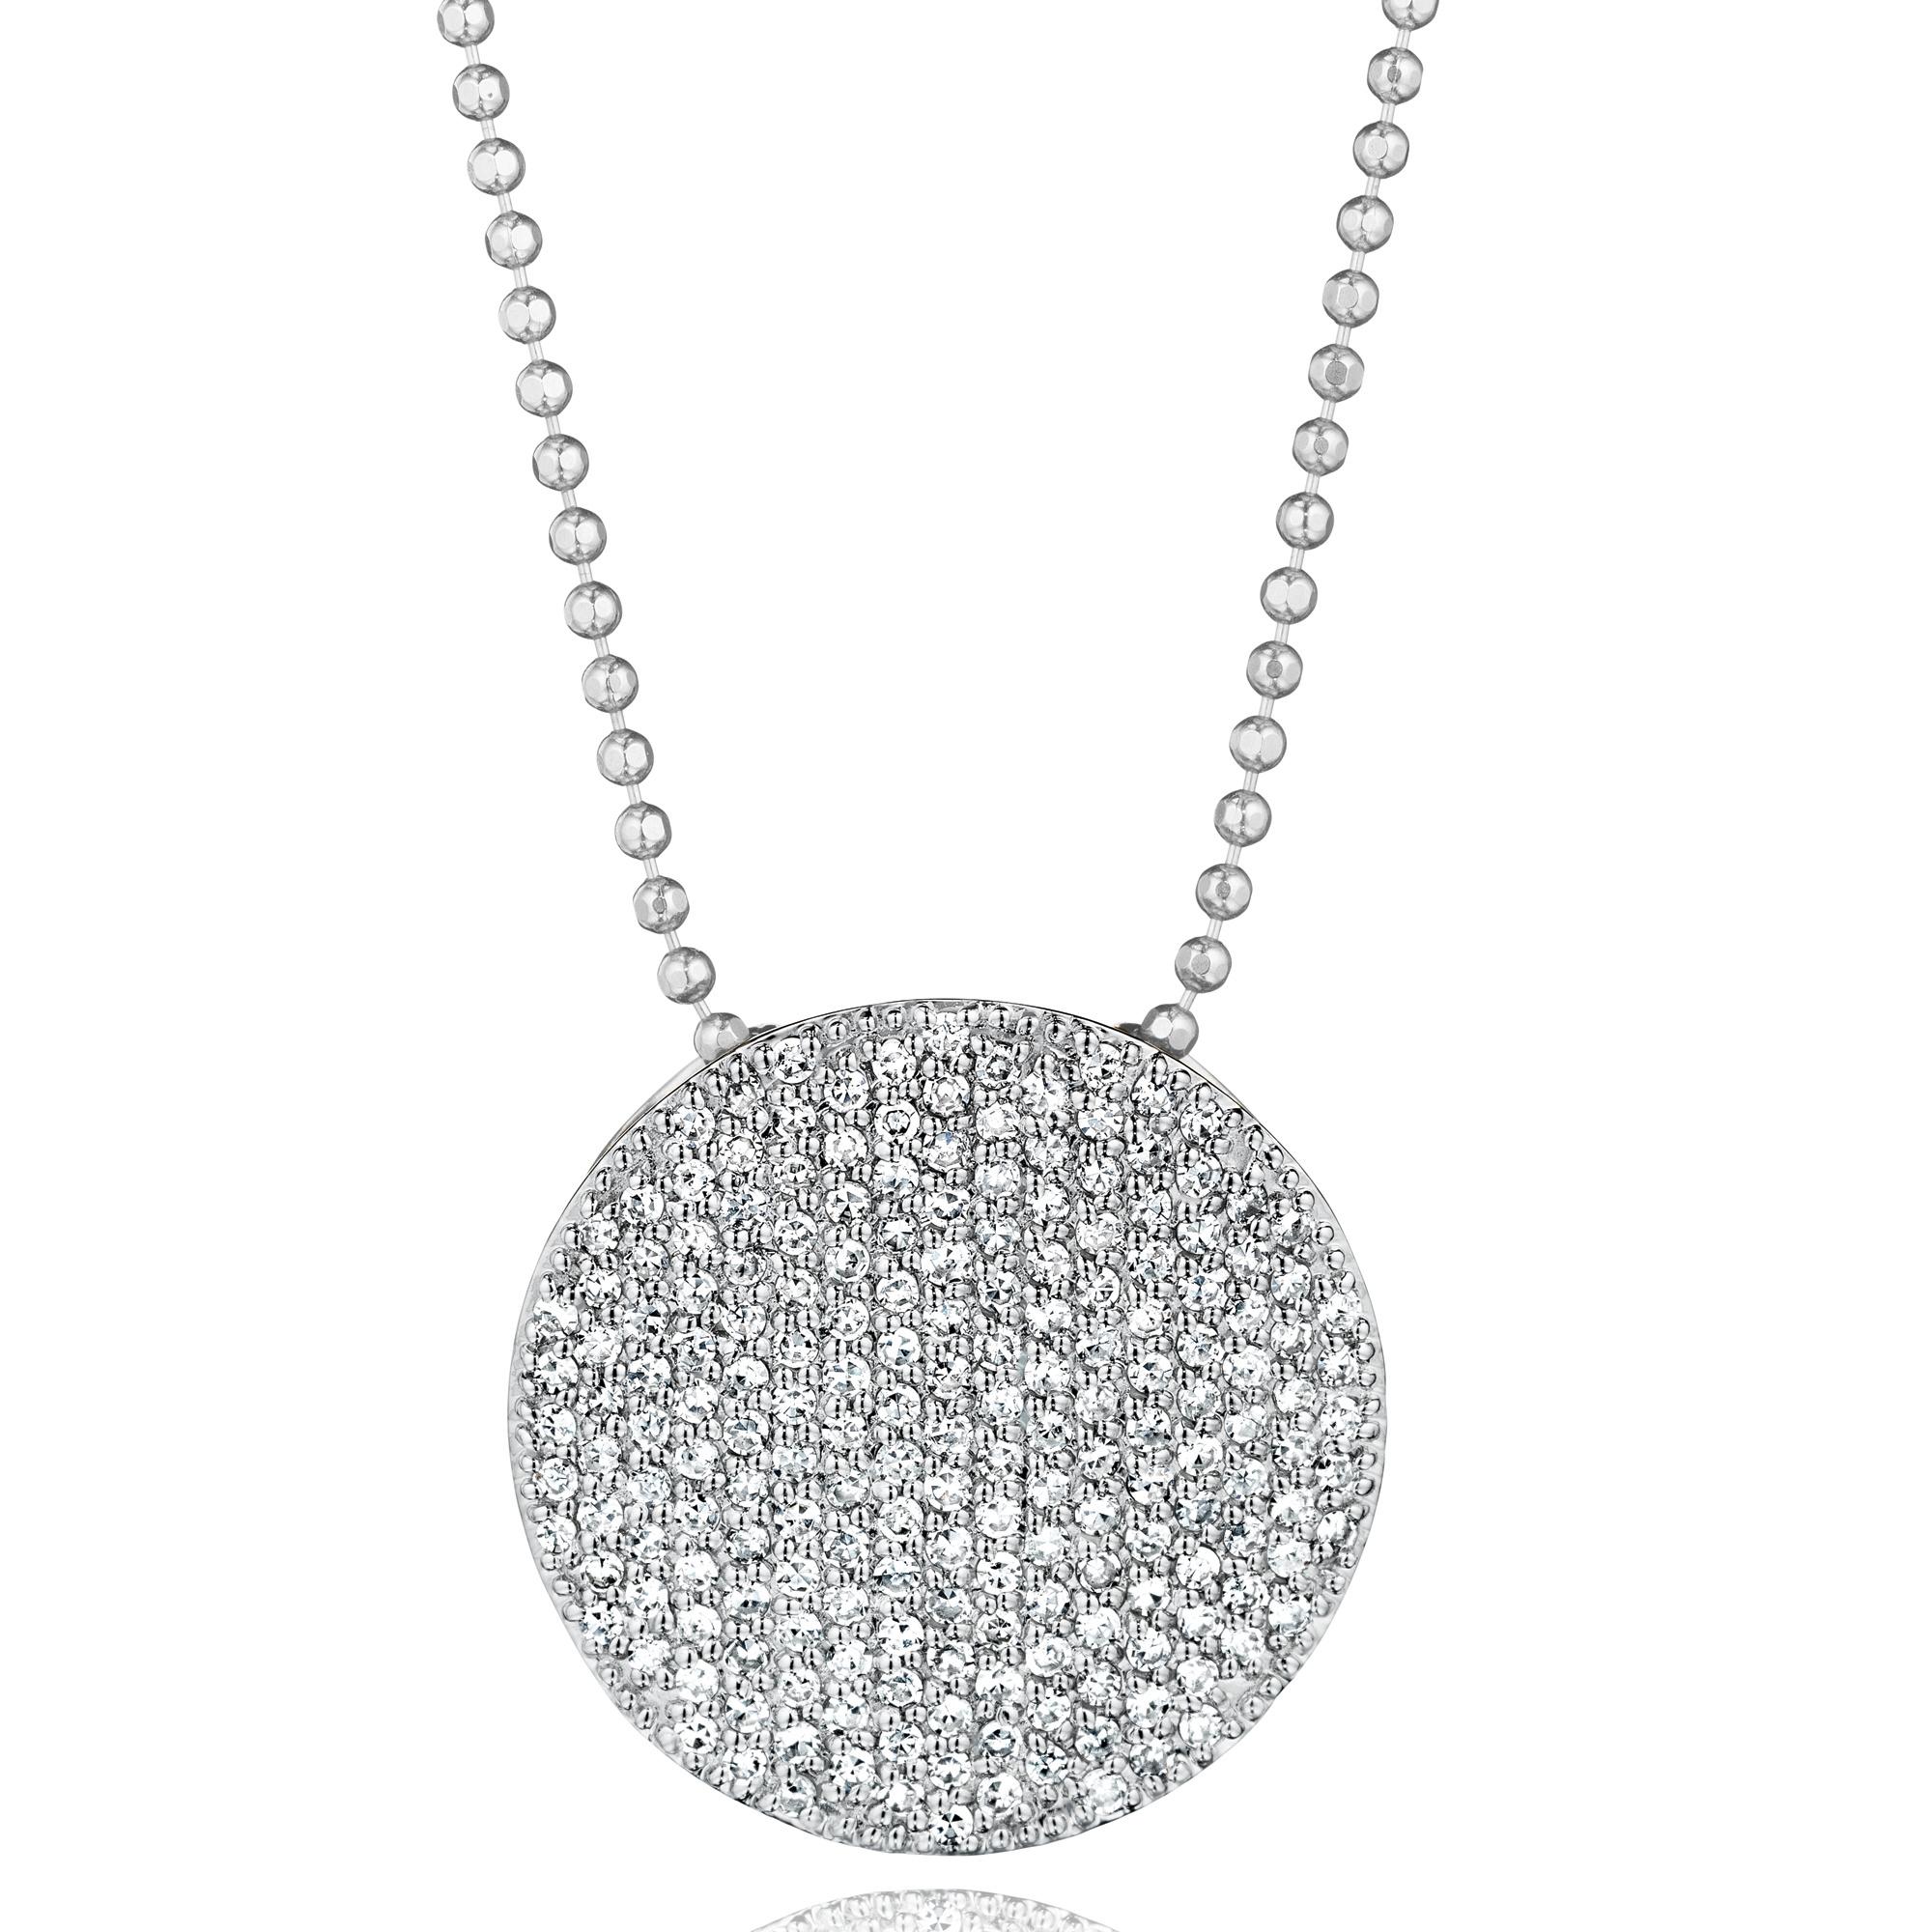 Women's Phillips House Large Infinity Necklace N20223PDW 1.00 Carat Diamond Disc For Sale